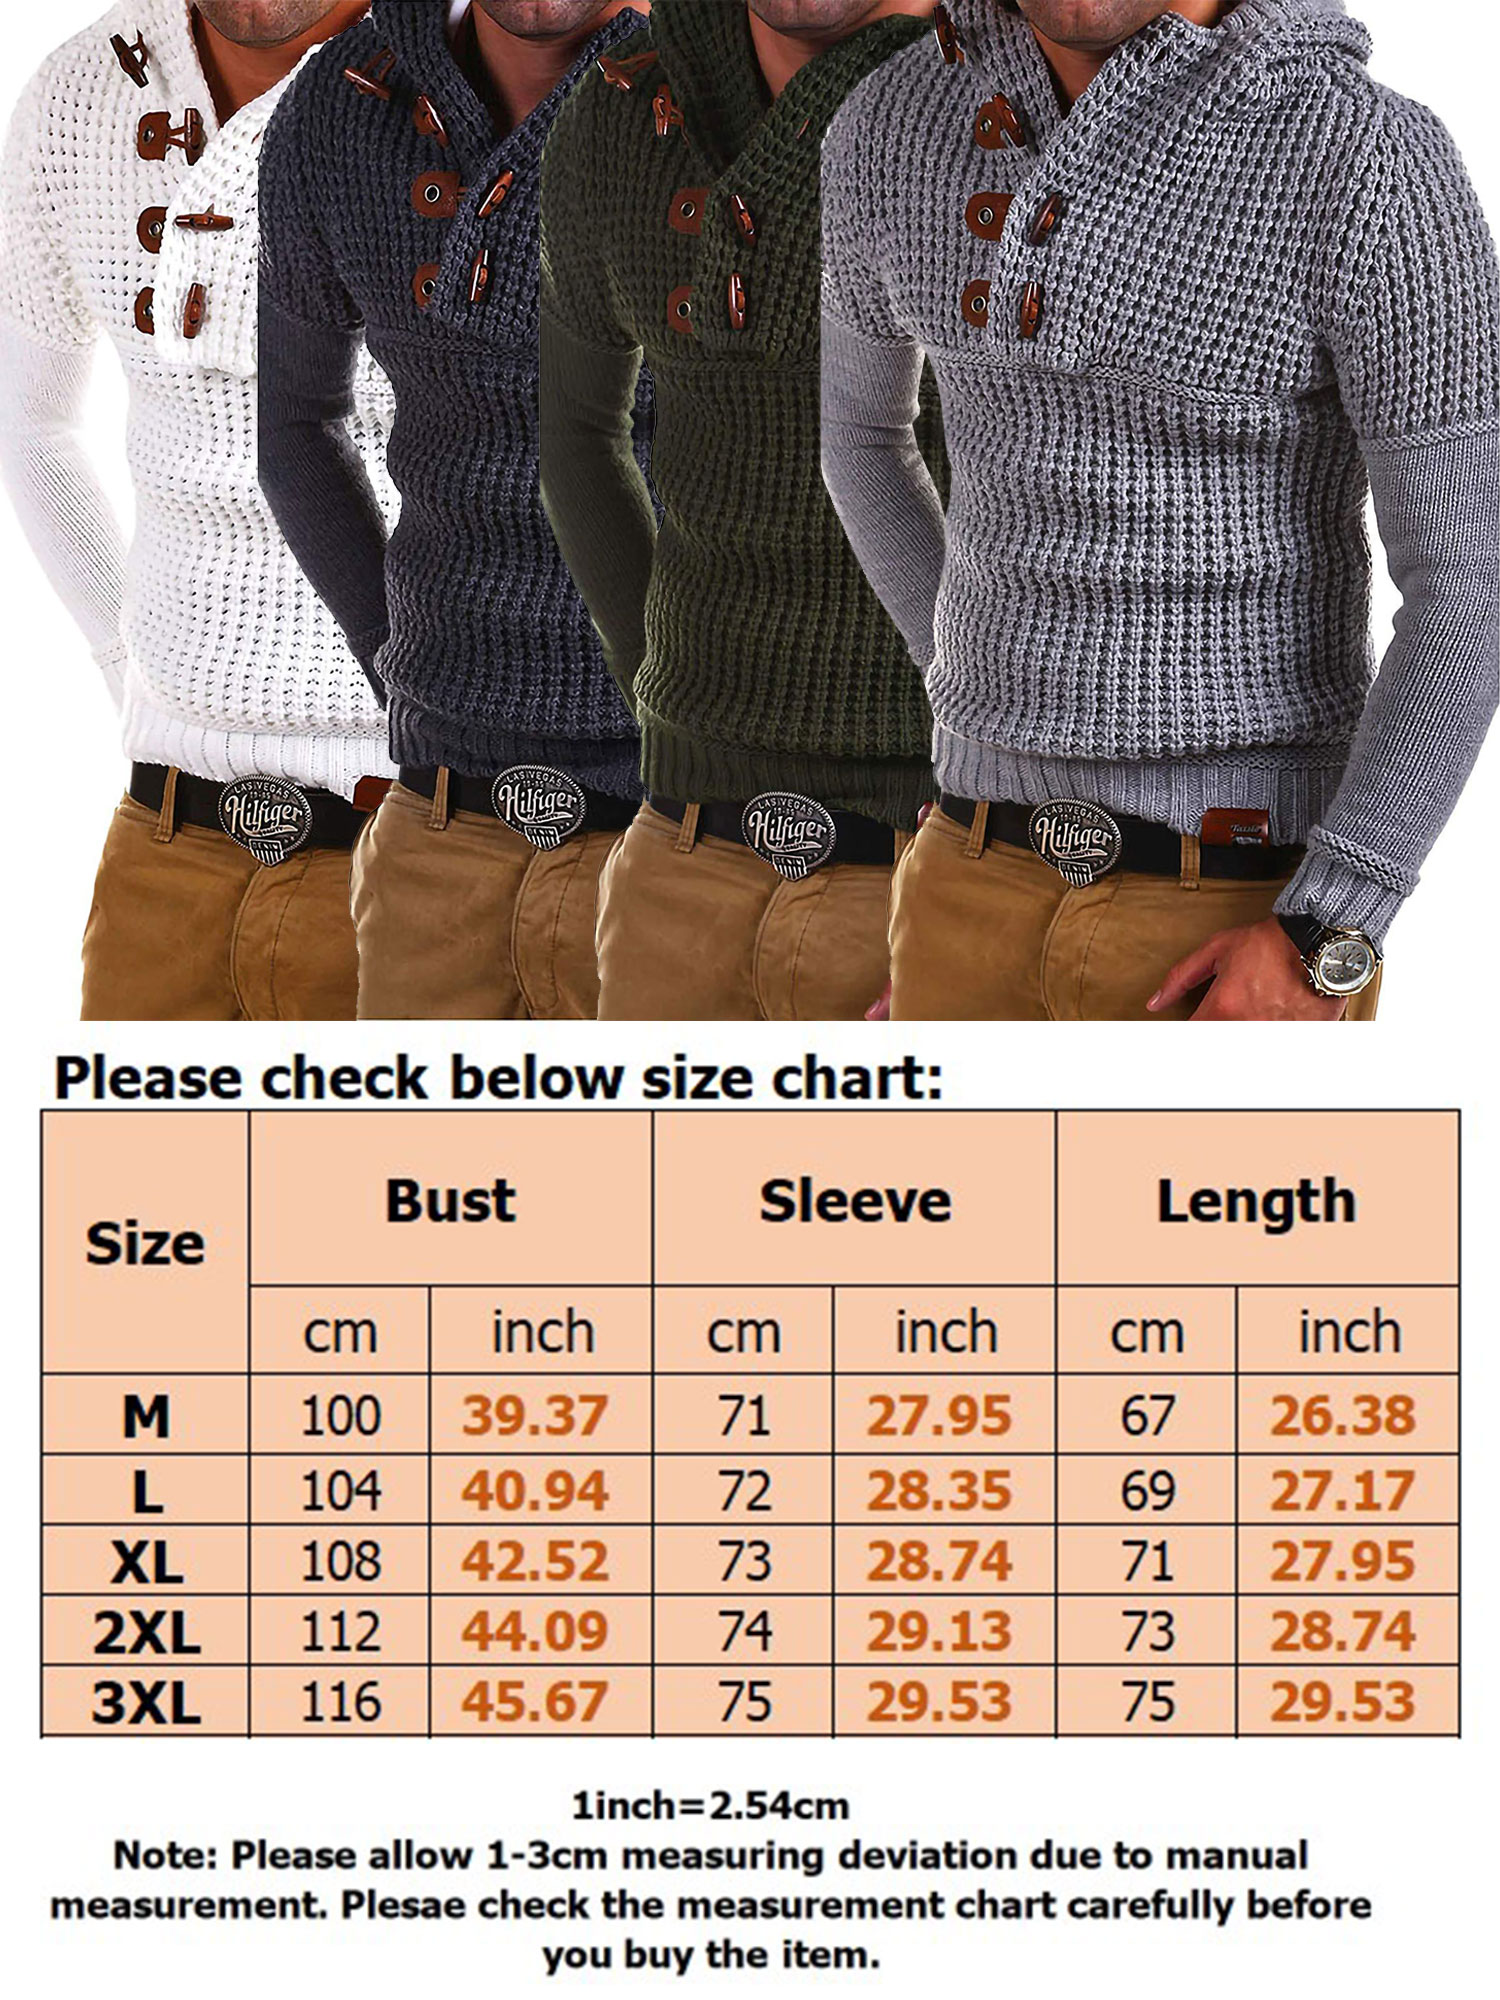 Niuer Mens Outdoor Thermal Hoodies Casual Solid Knitted Pullover Top Long Sleeve Button Placket Sweater Jumper - image 2 of 2